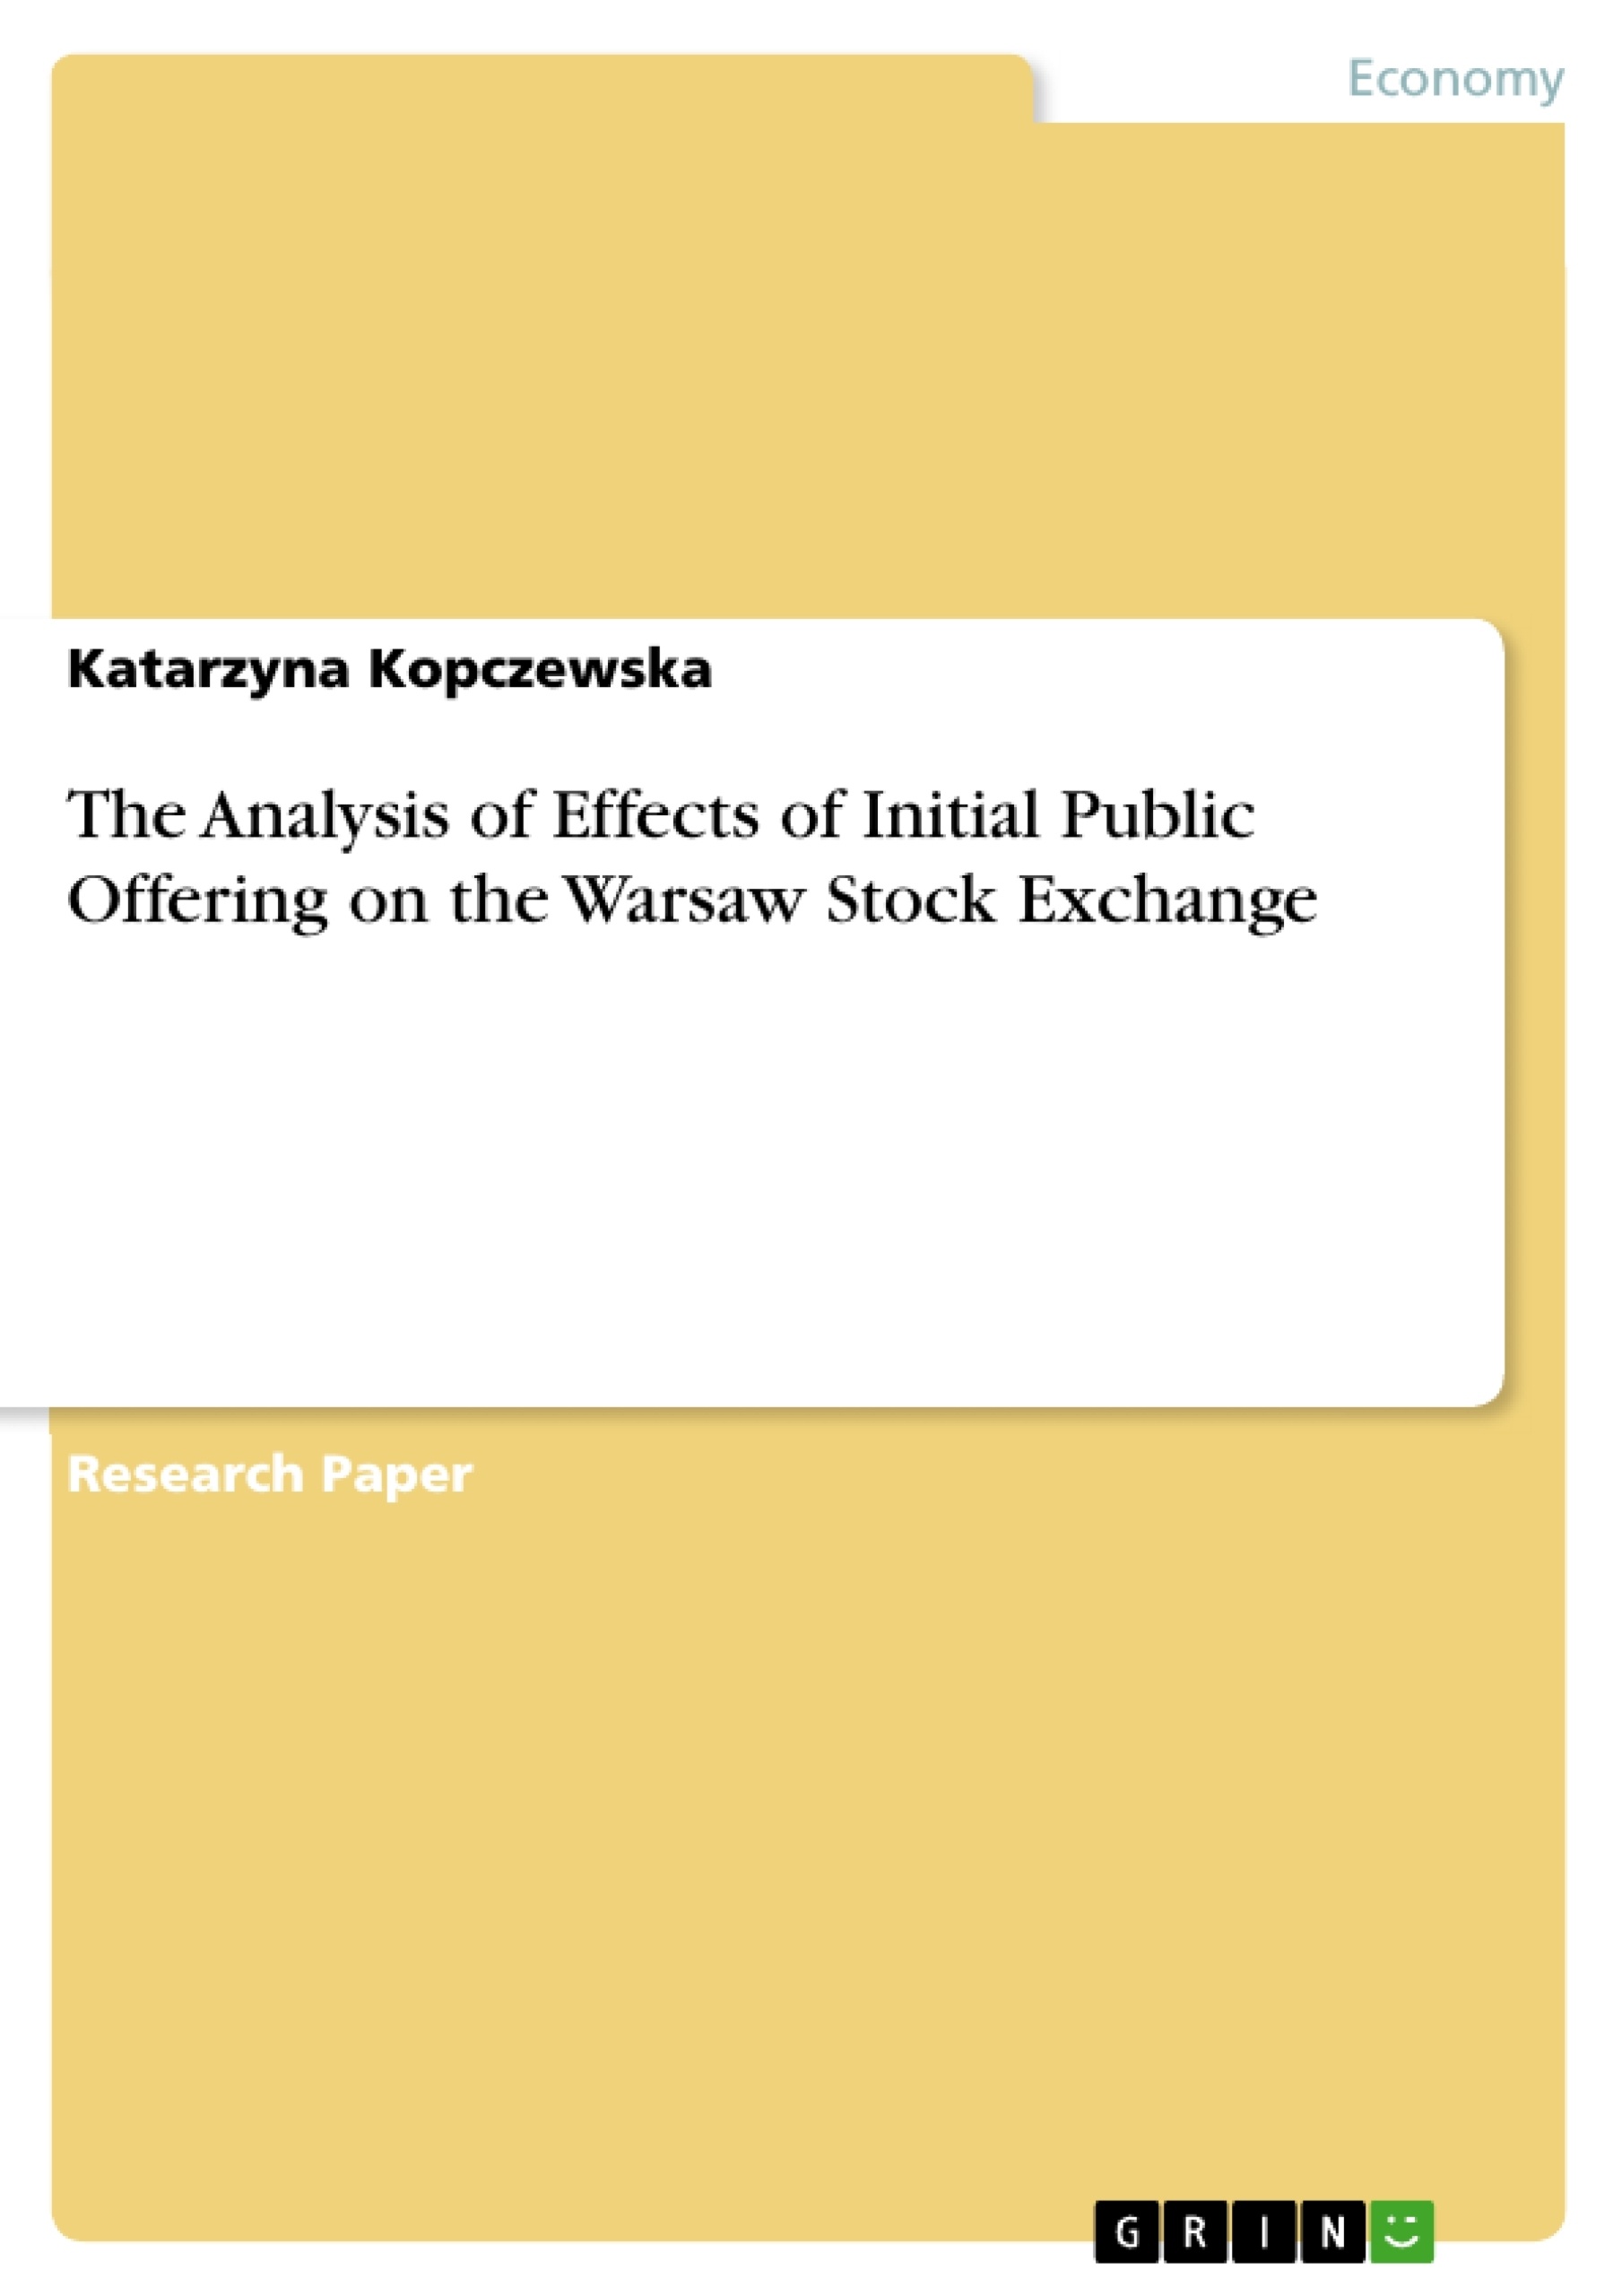 Title: The Analysis of Effects of Initial Public Offering on the Warsaw Stock Exchange